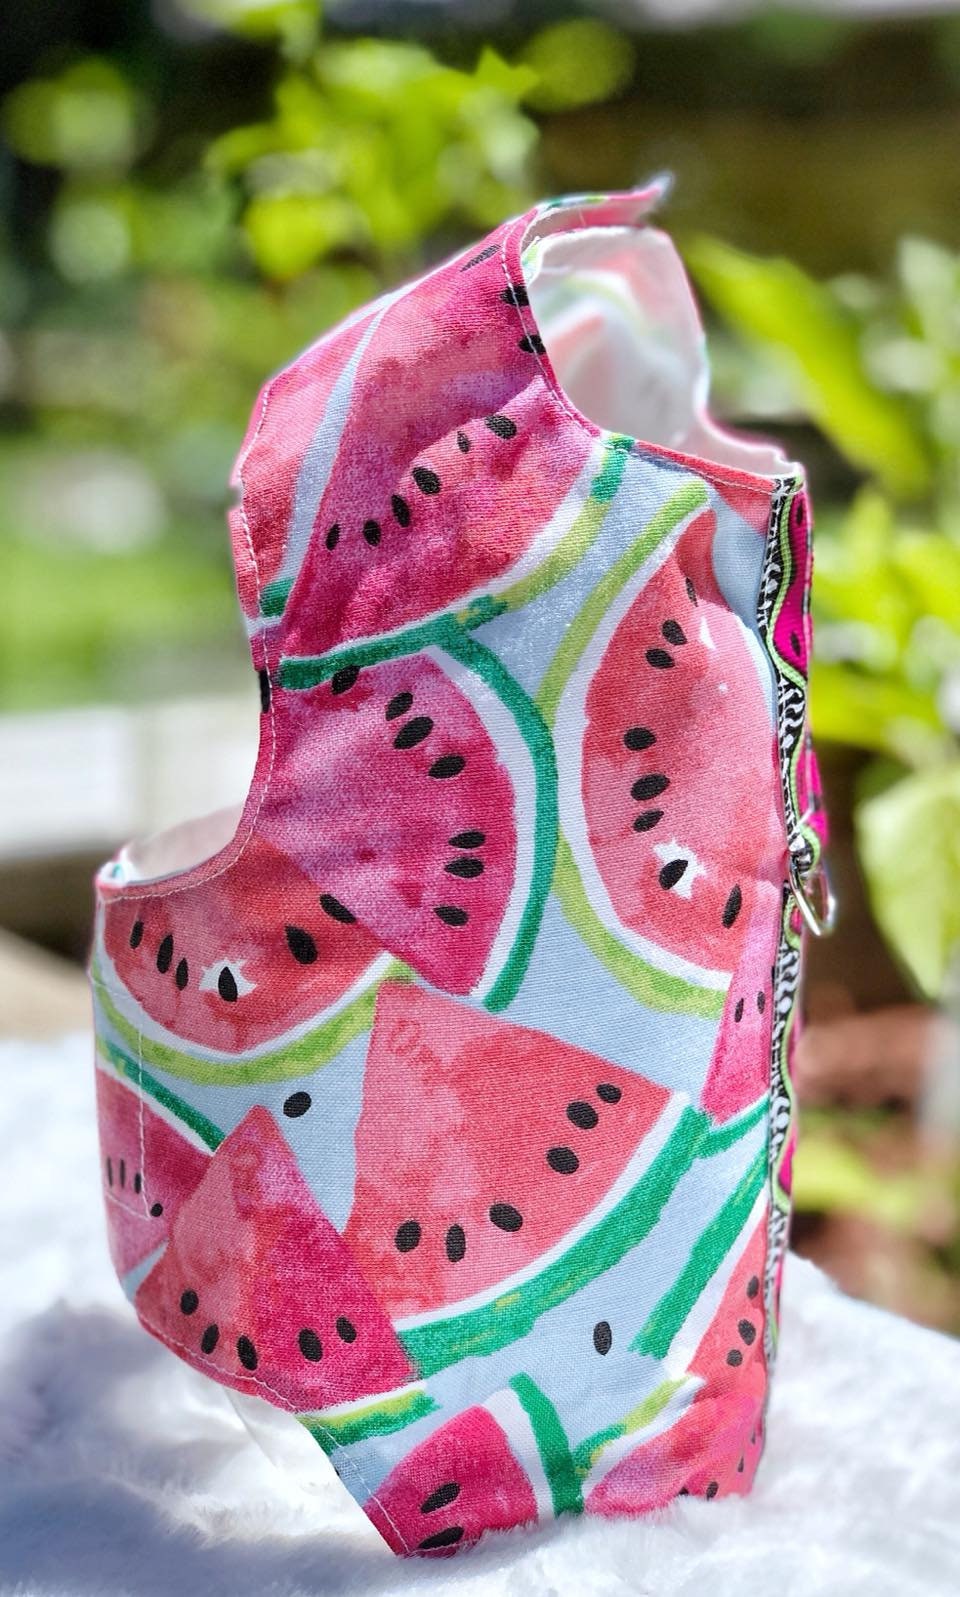 Dog Pet Cat Harness  Watermelon Summer Fancy Pet Clothing  and Leash ring 4-6lbs PRE MADE ships fast